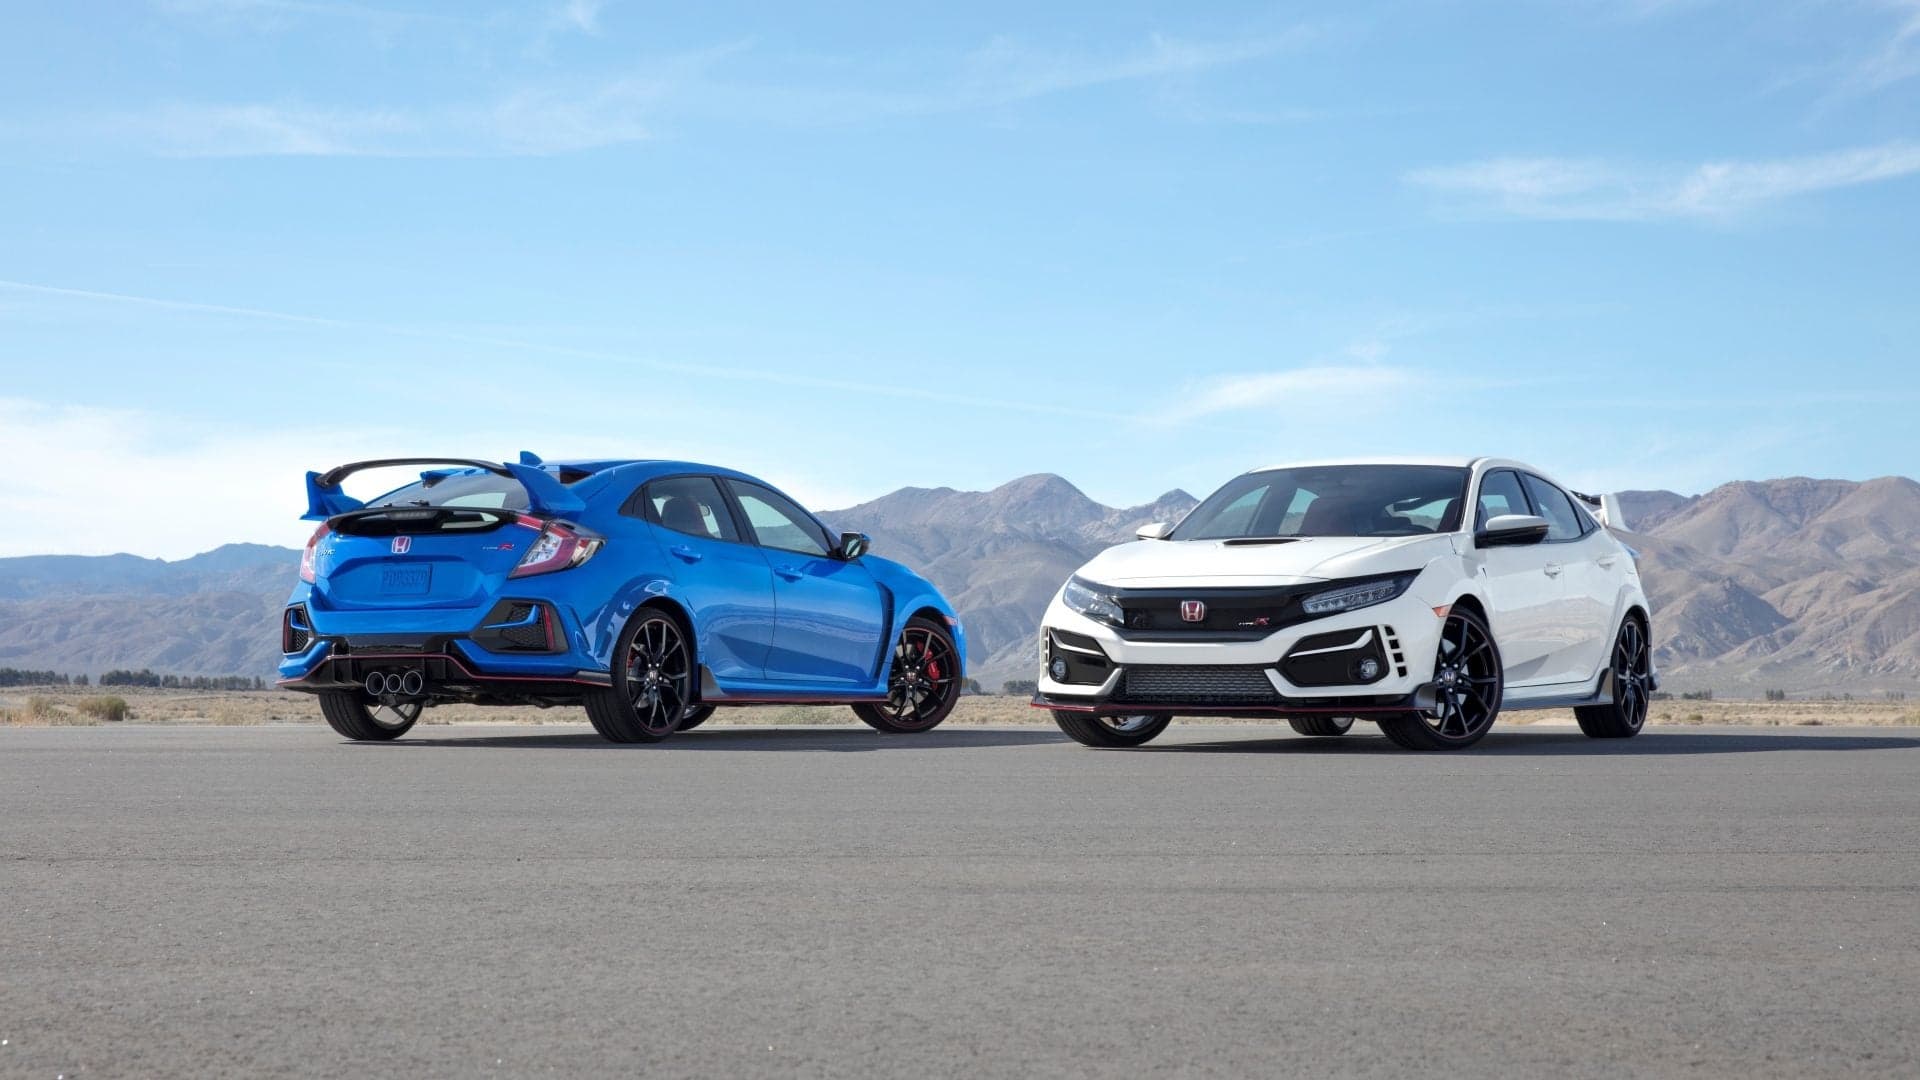 The Updated 2020 Honda Civic Type R Gets Better Brakes, A Shorter Shifter And More